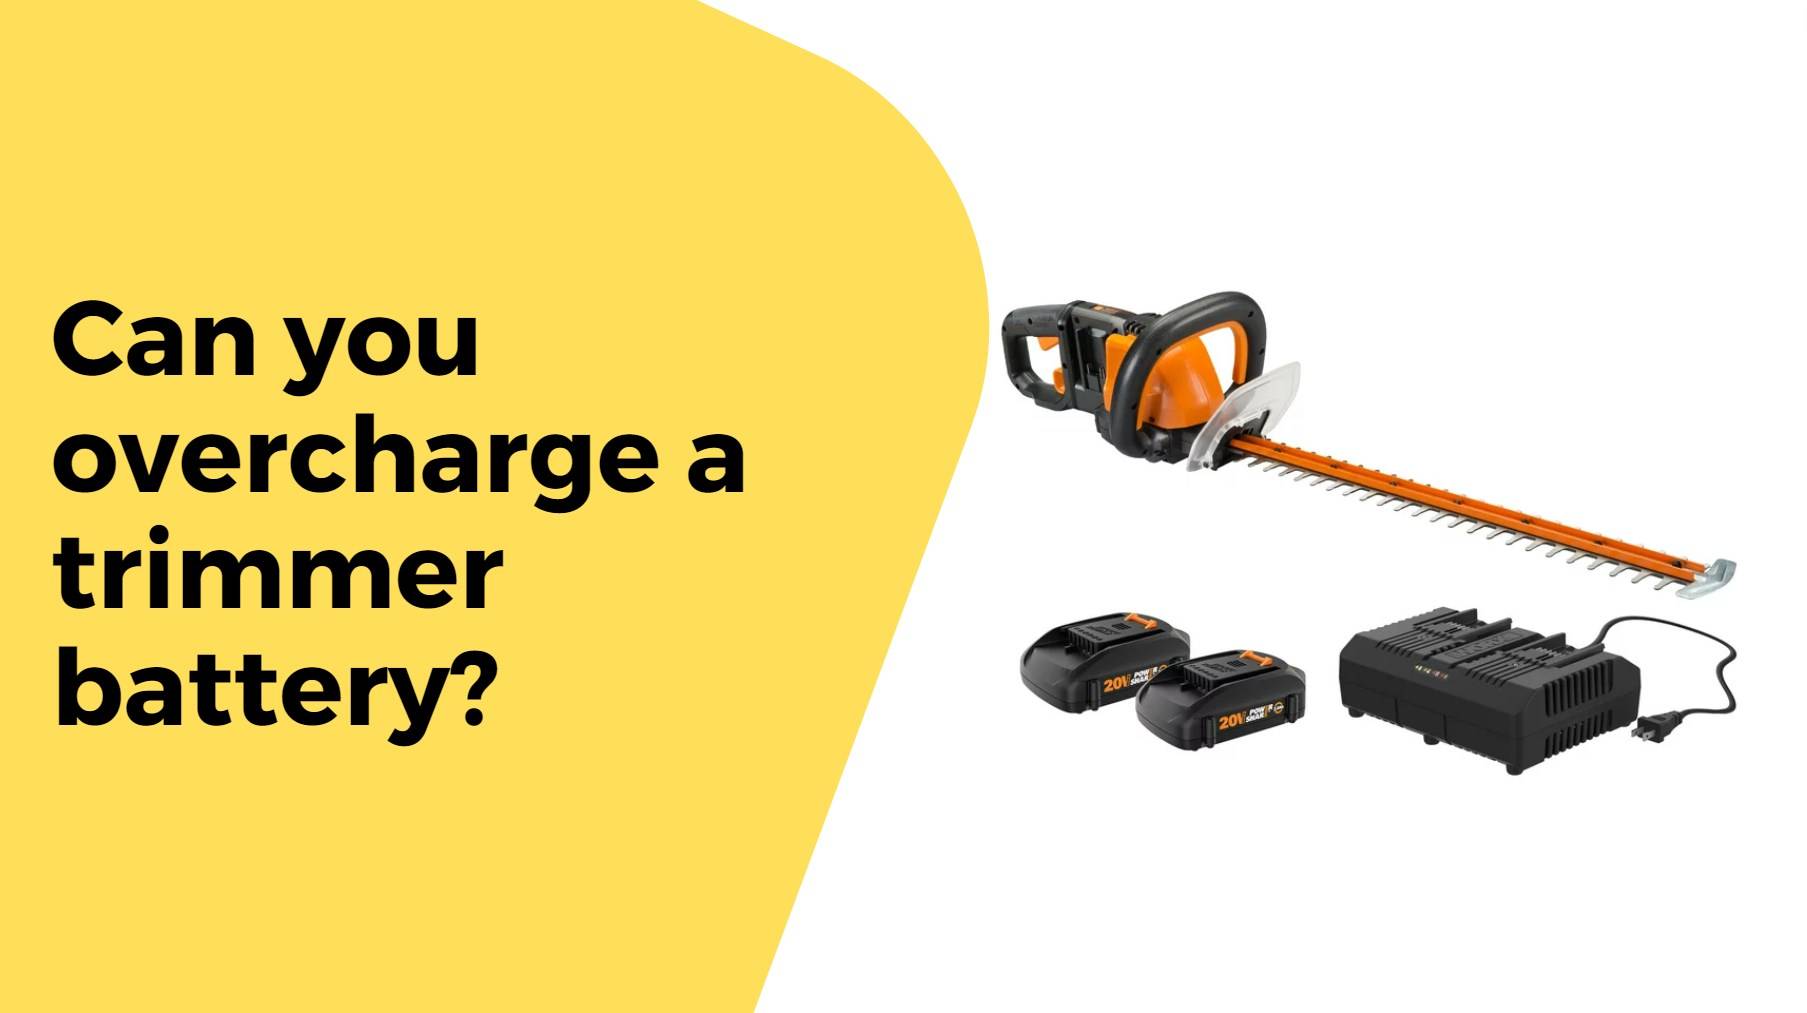 Can you overcharge a trimmer battery?